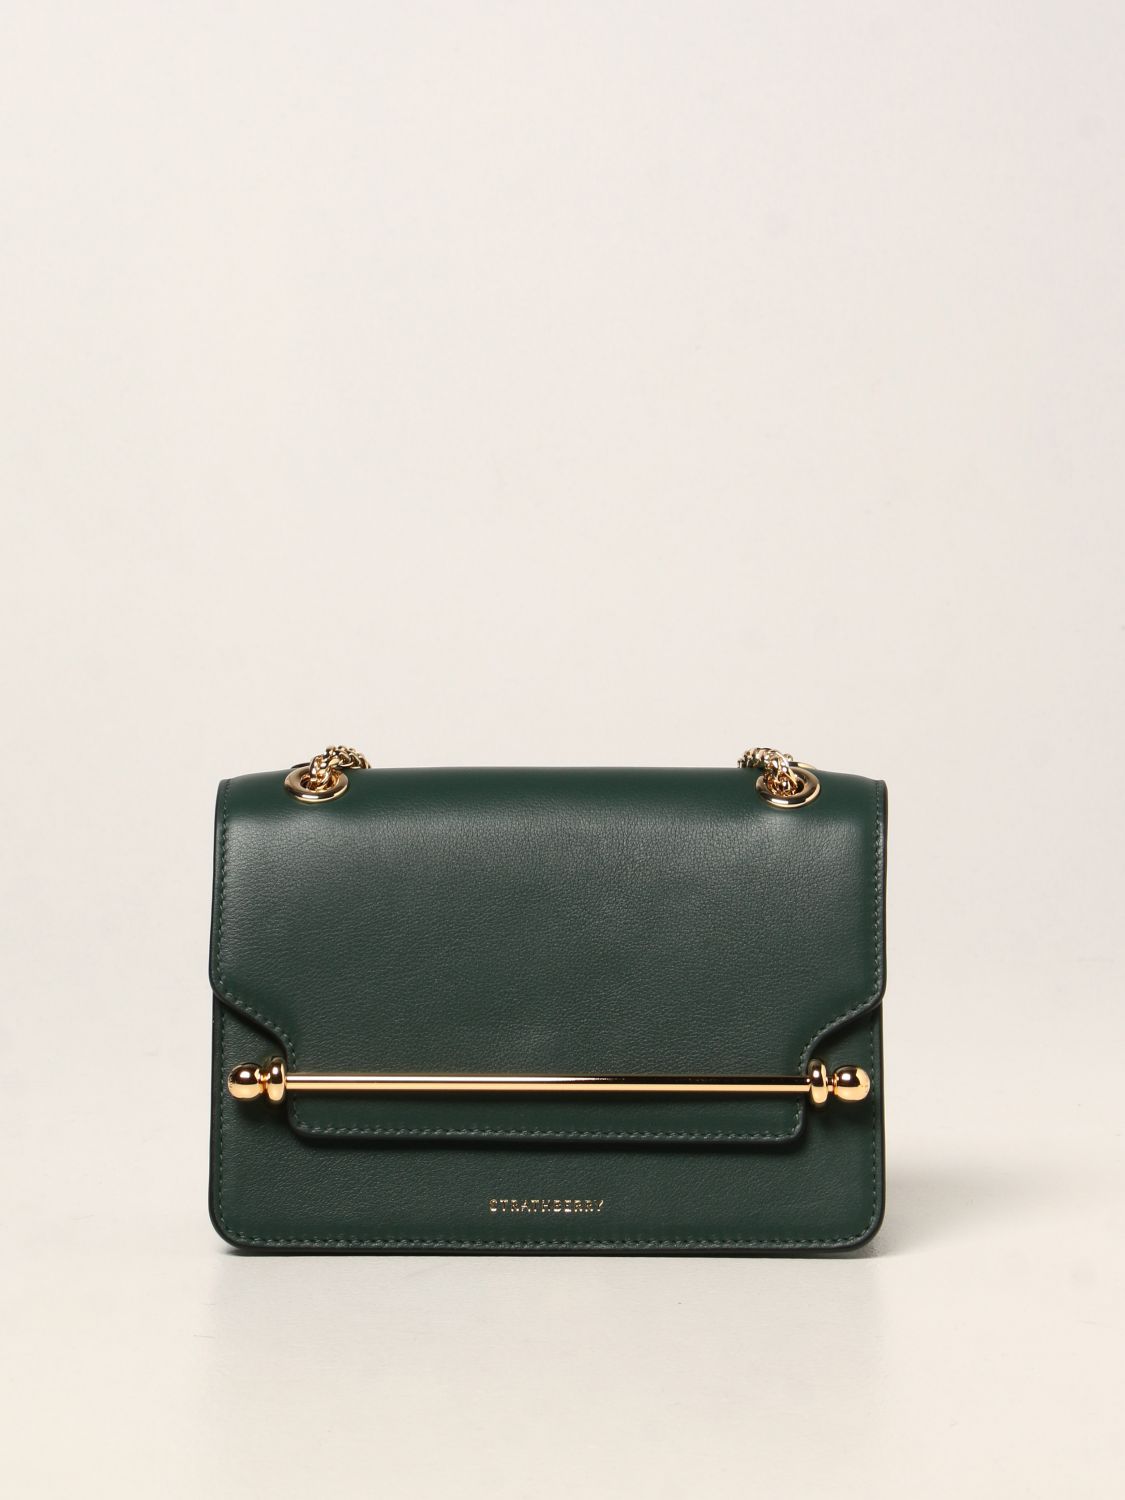 STRATHBERRY: East / West mini leather bag - Green | Strathberry mini ...